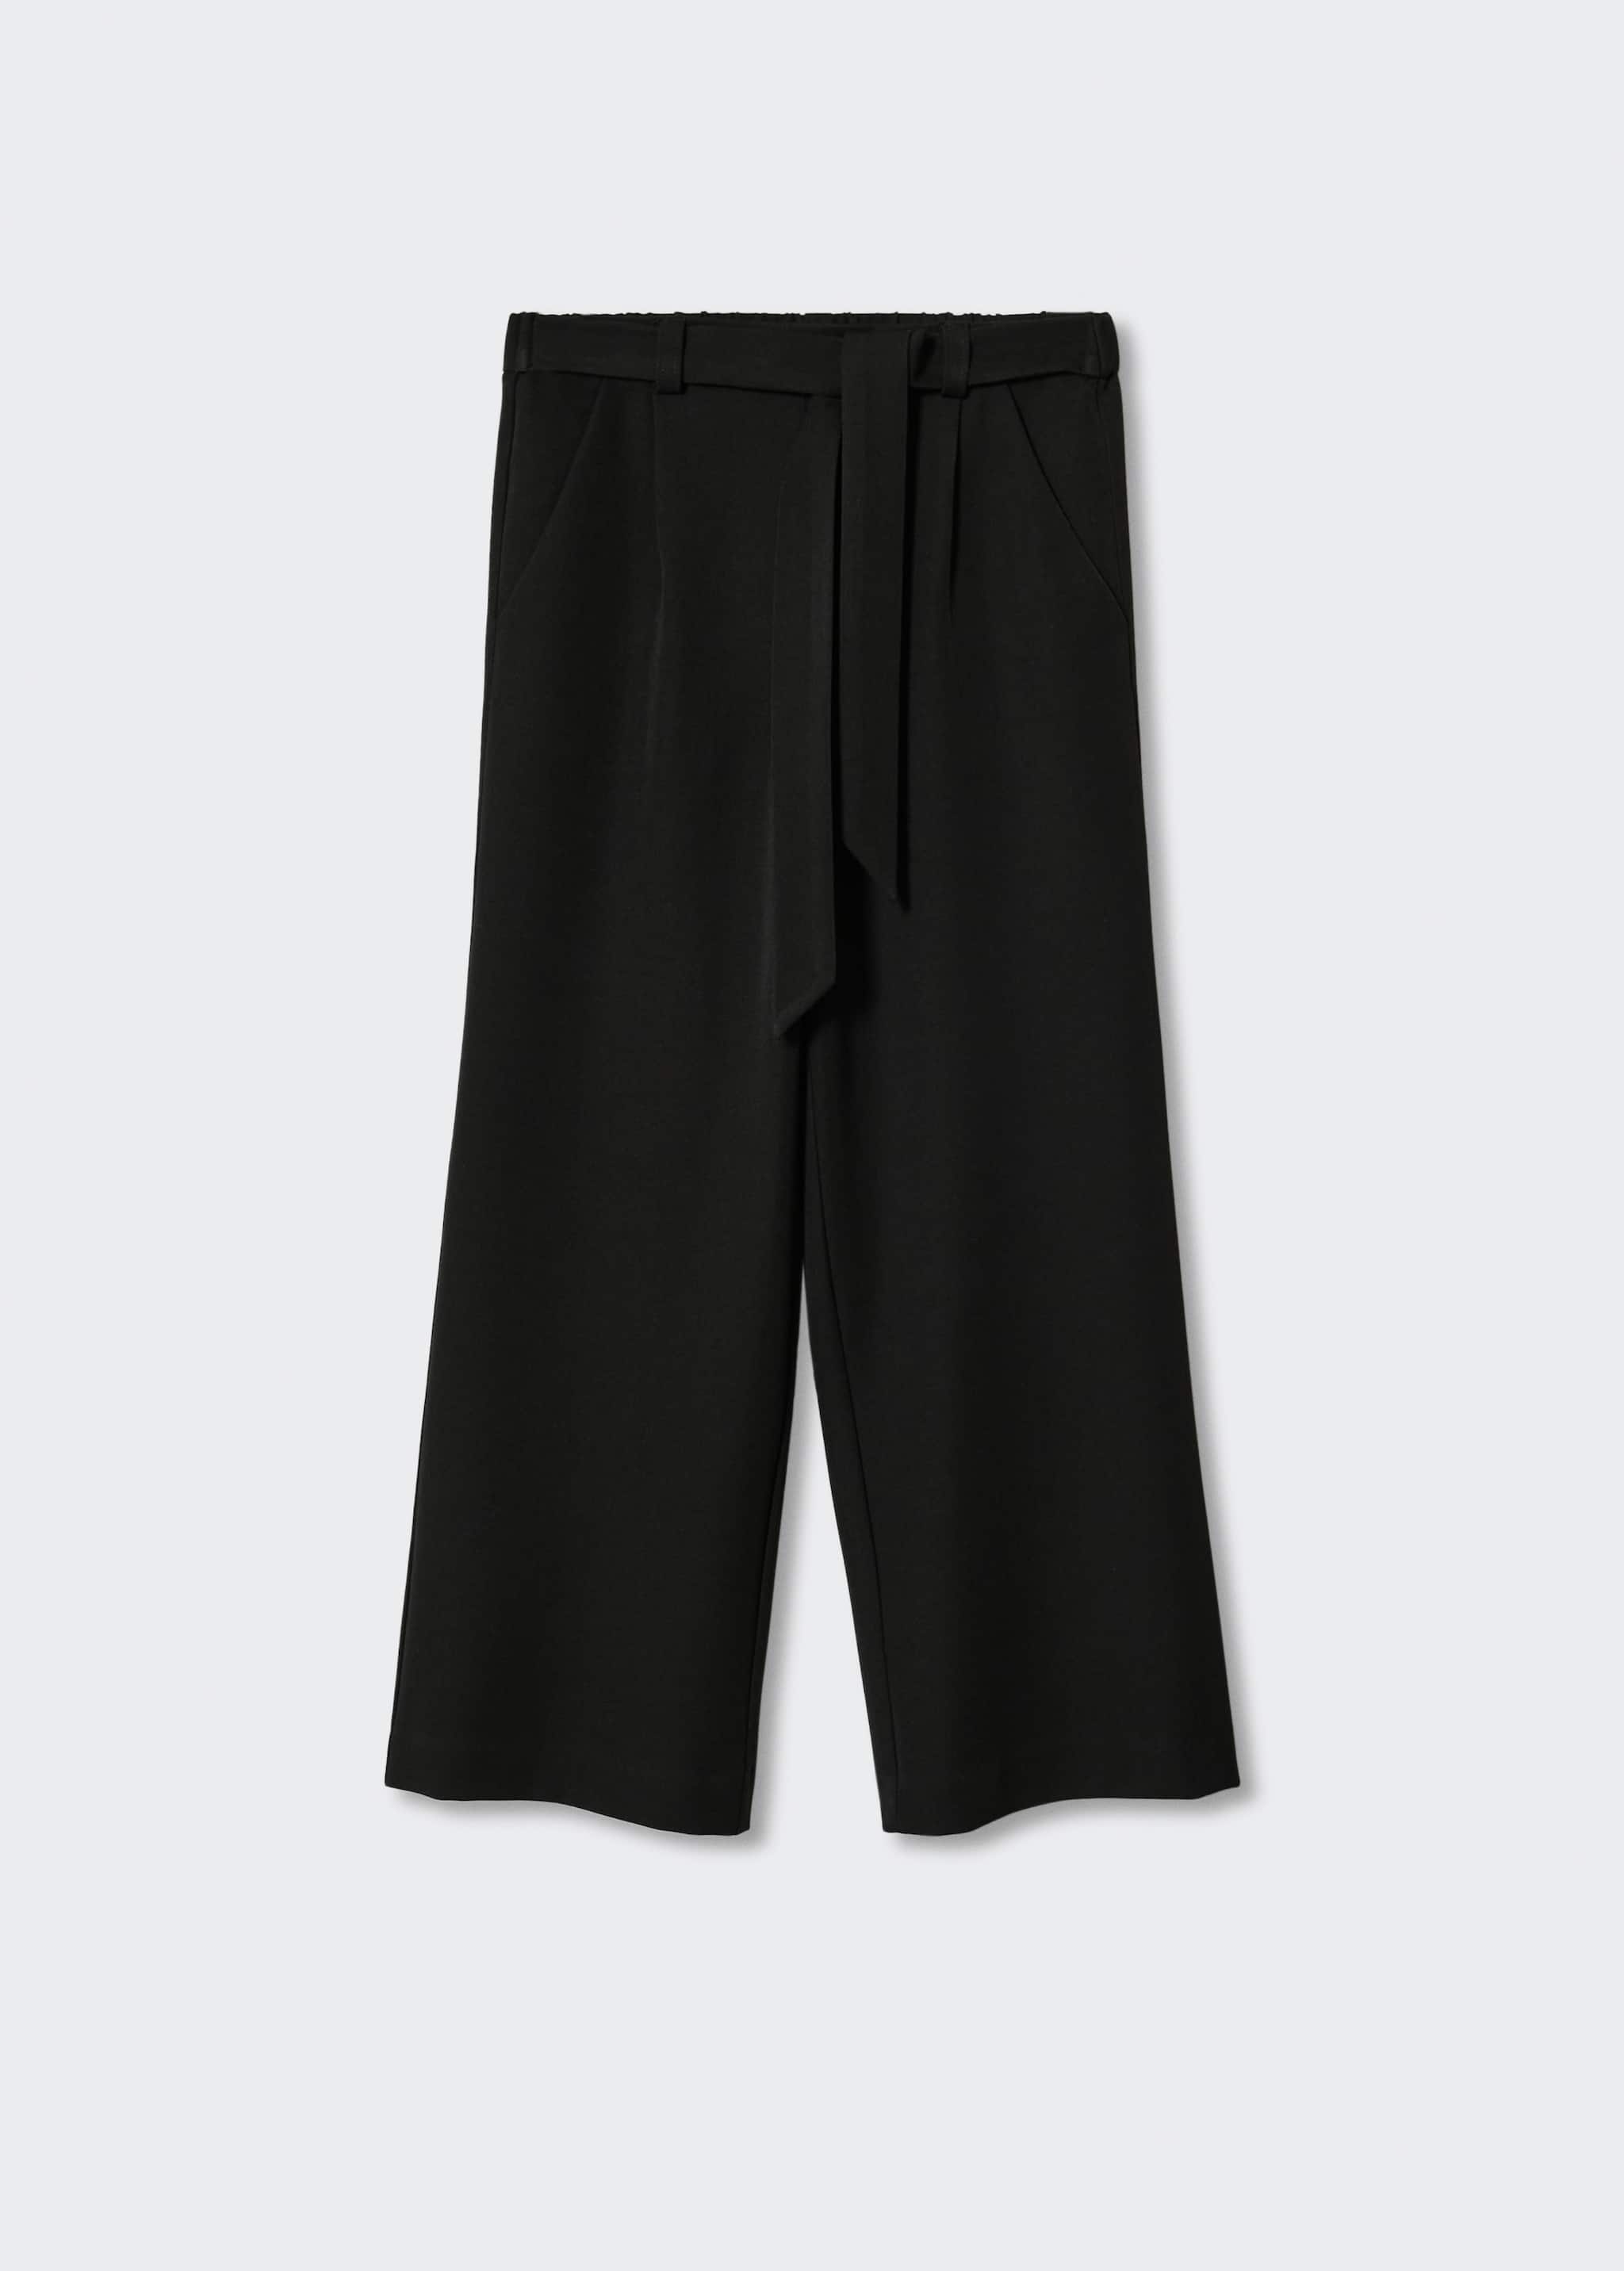 Belt culottes trousers - Article without model